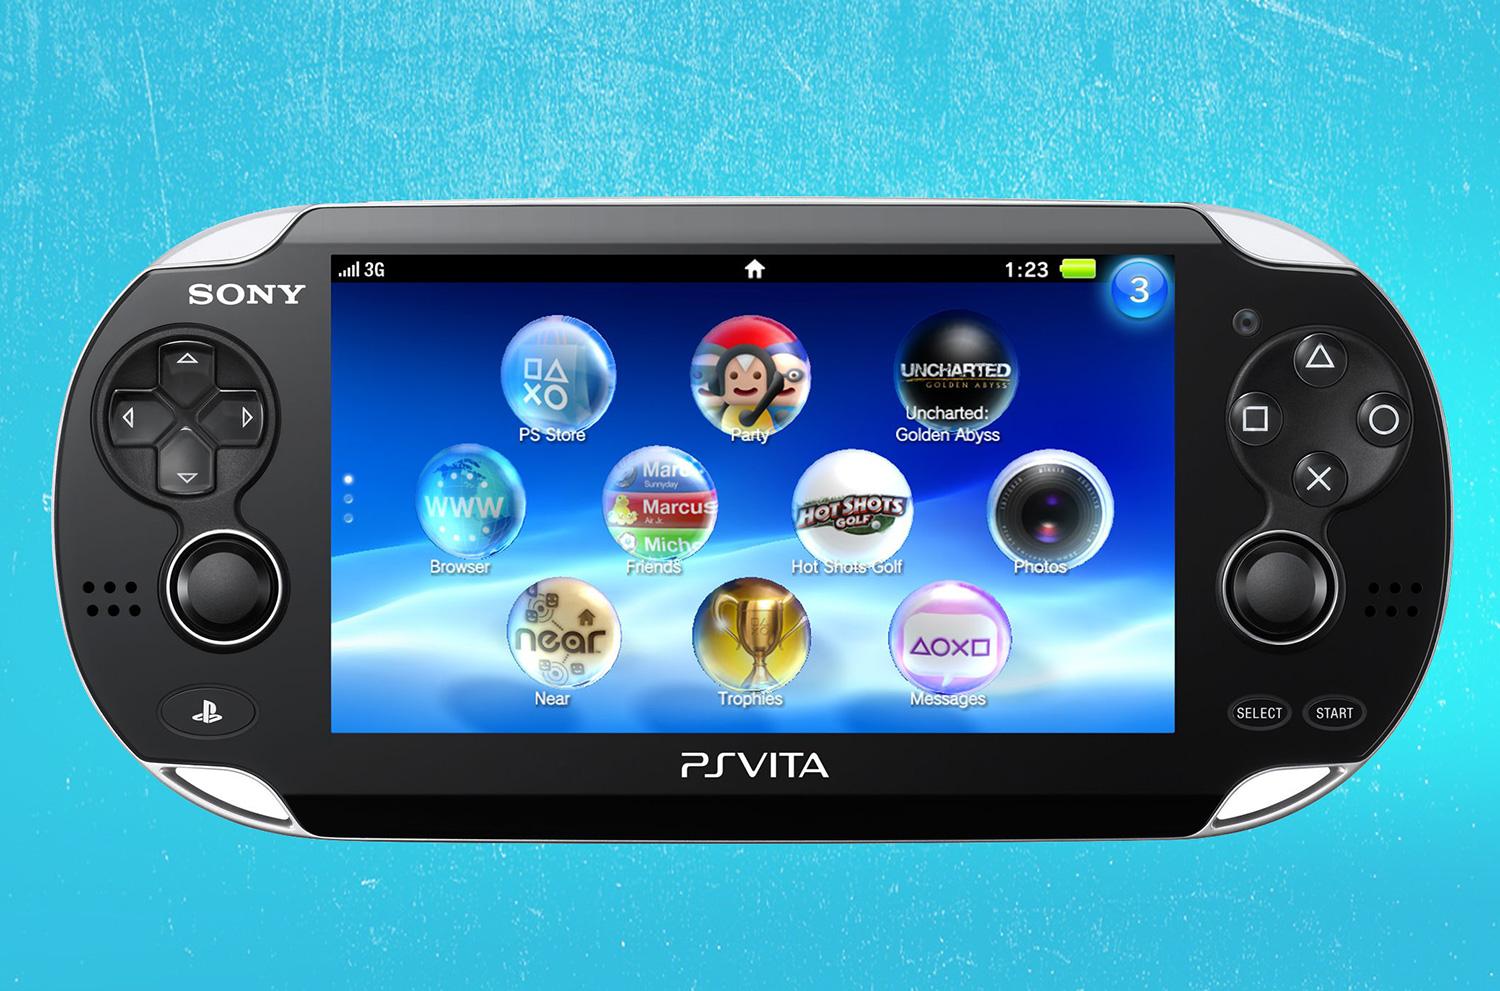 Update: PlayStation Portal Remote Play Device Launches November 15 For $200  - Game Informer